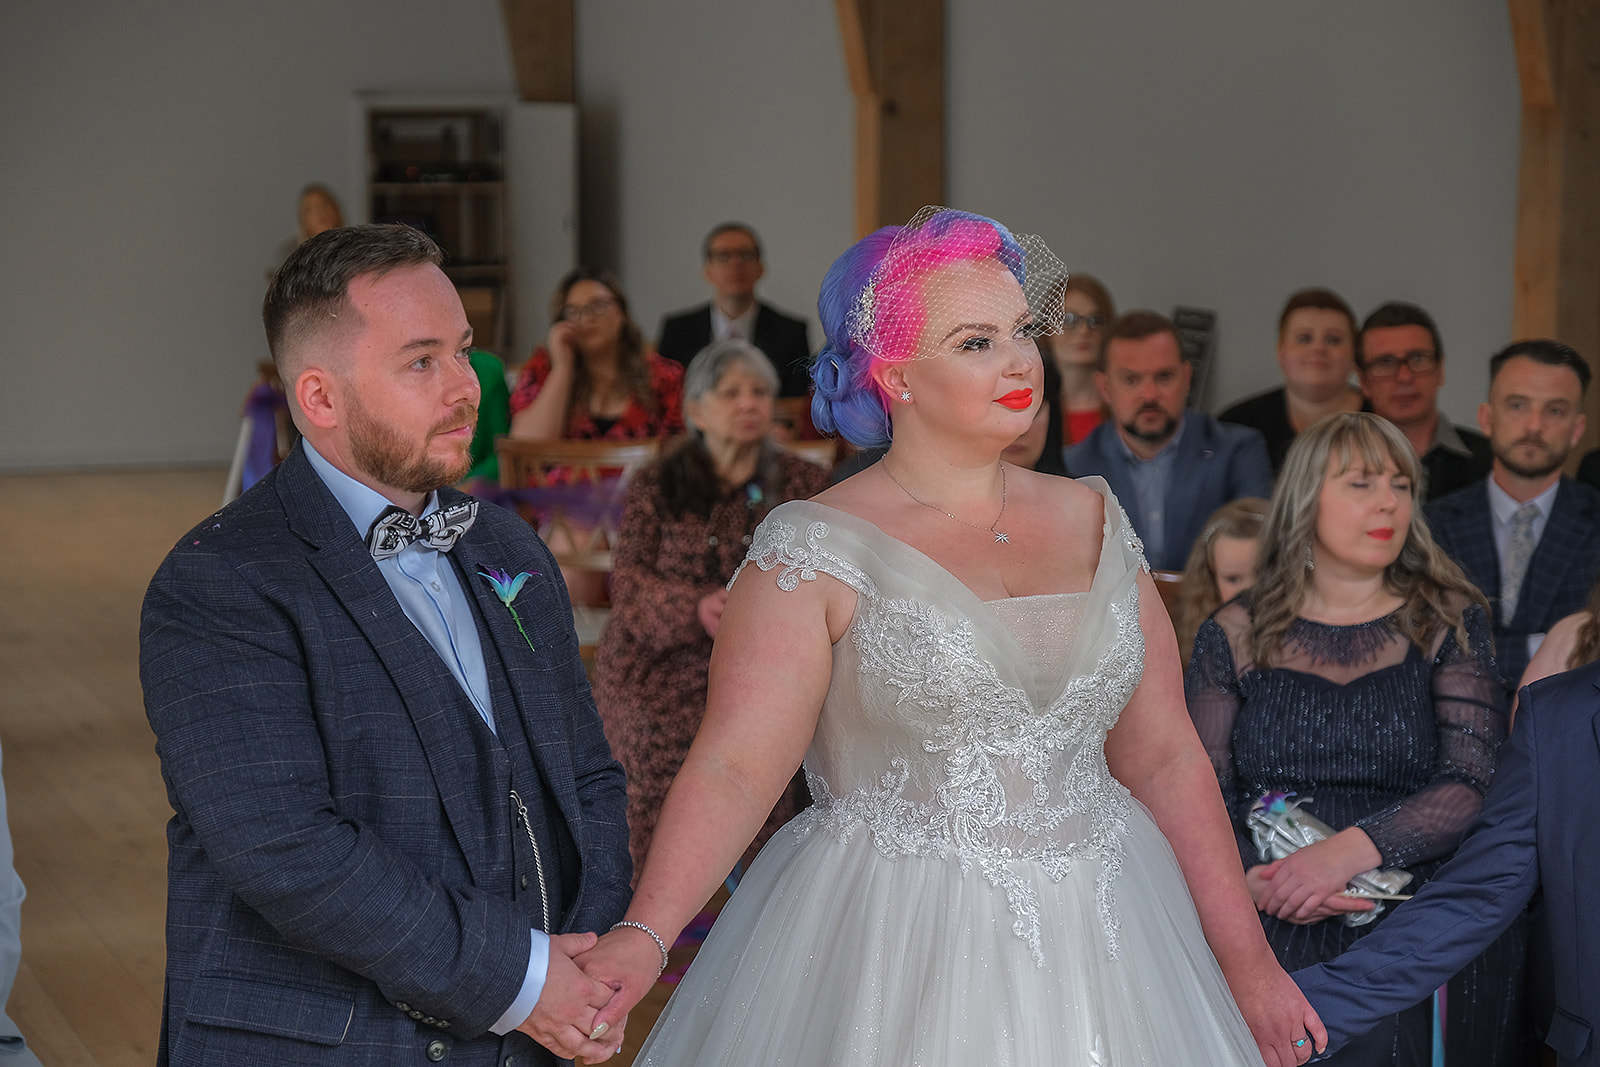 bride with pink hair and white voluminous dress, holding hands with groom in plaid suit and bow tie